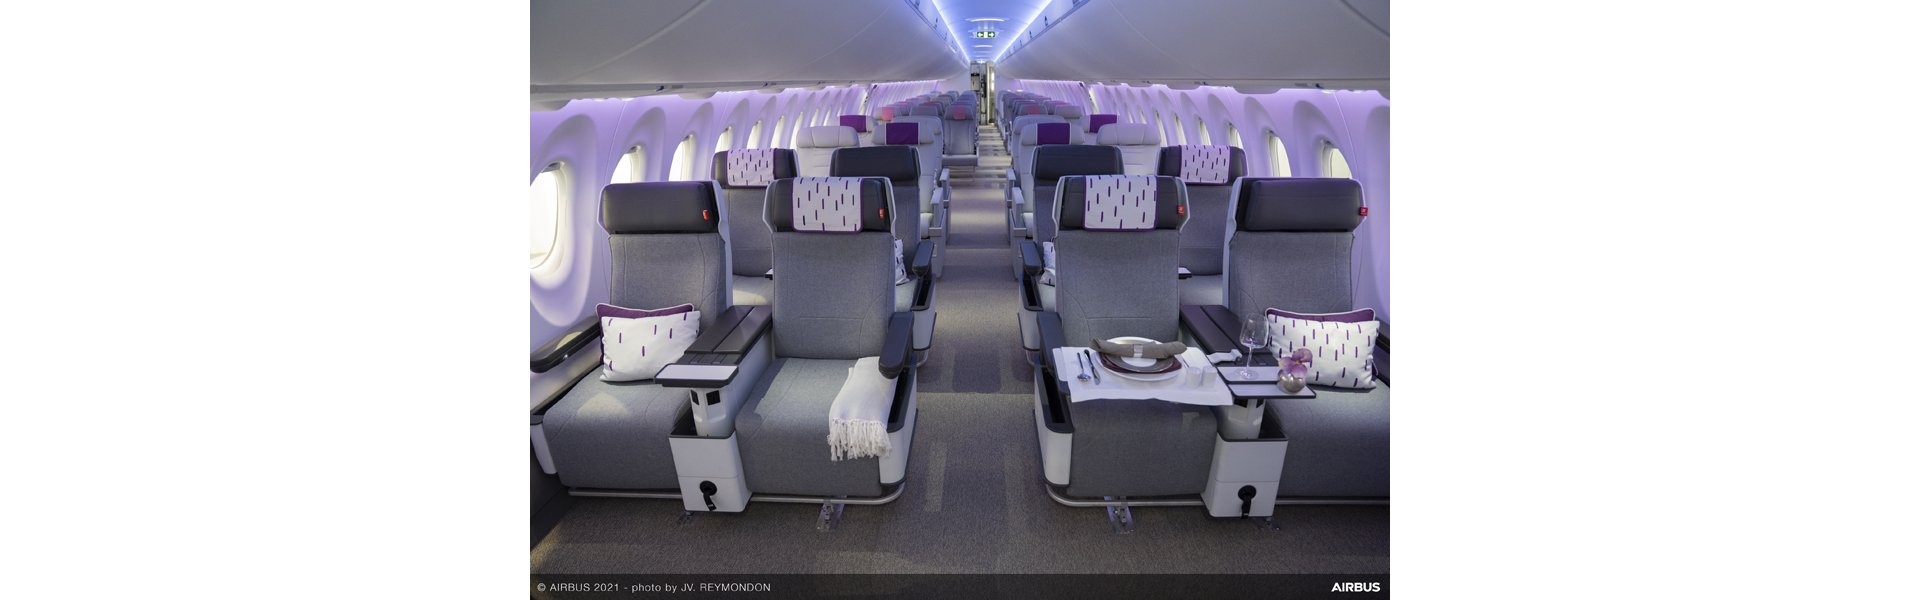 Download Airbus Reveals Its New A220 Full Size Cabin Display Commercial Aircraft Airbus